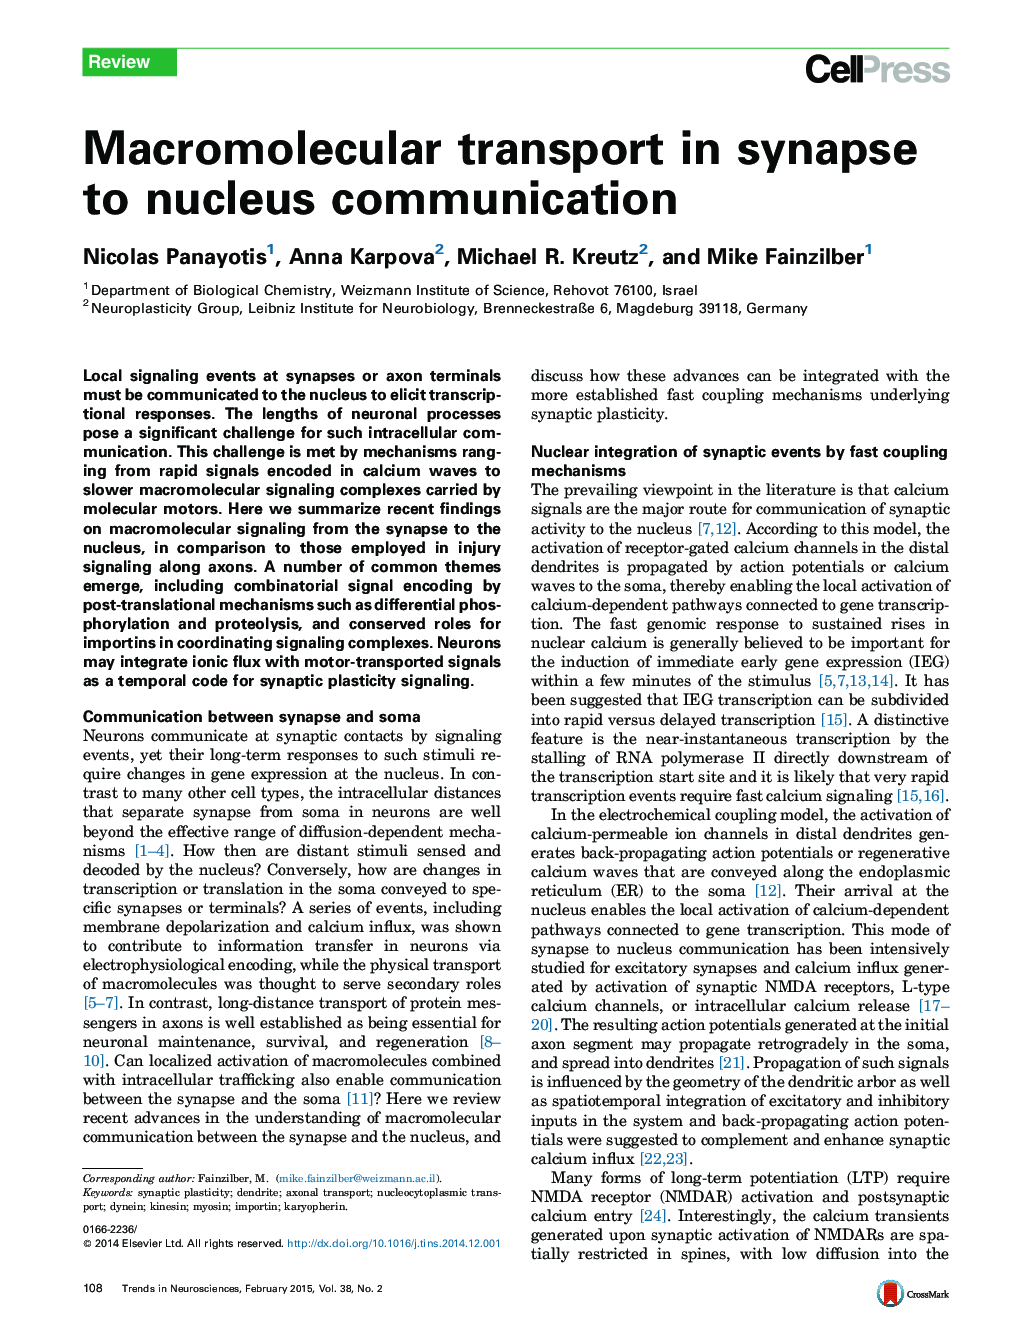 Macromolecular transport in synapse to nucleus communication